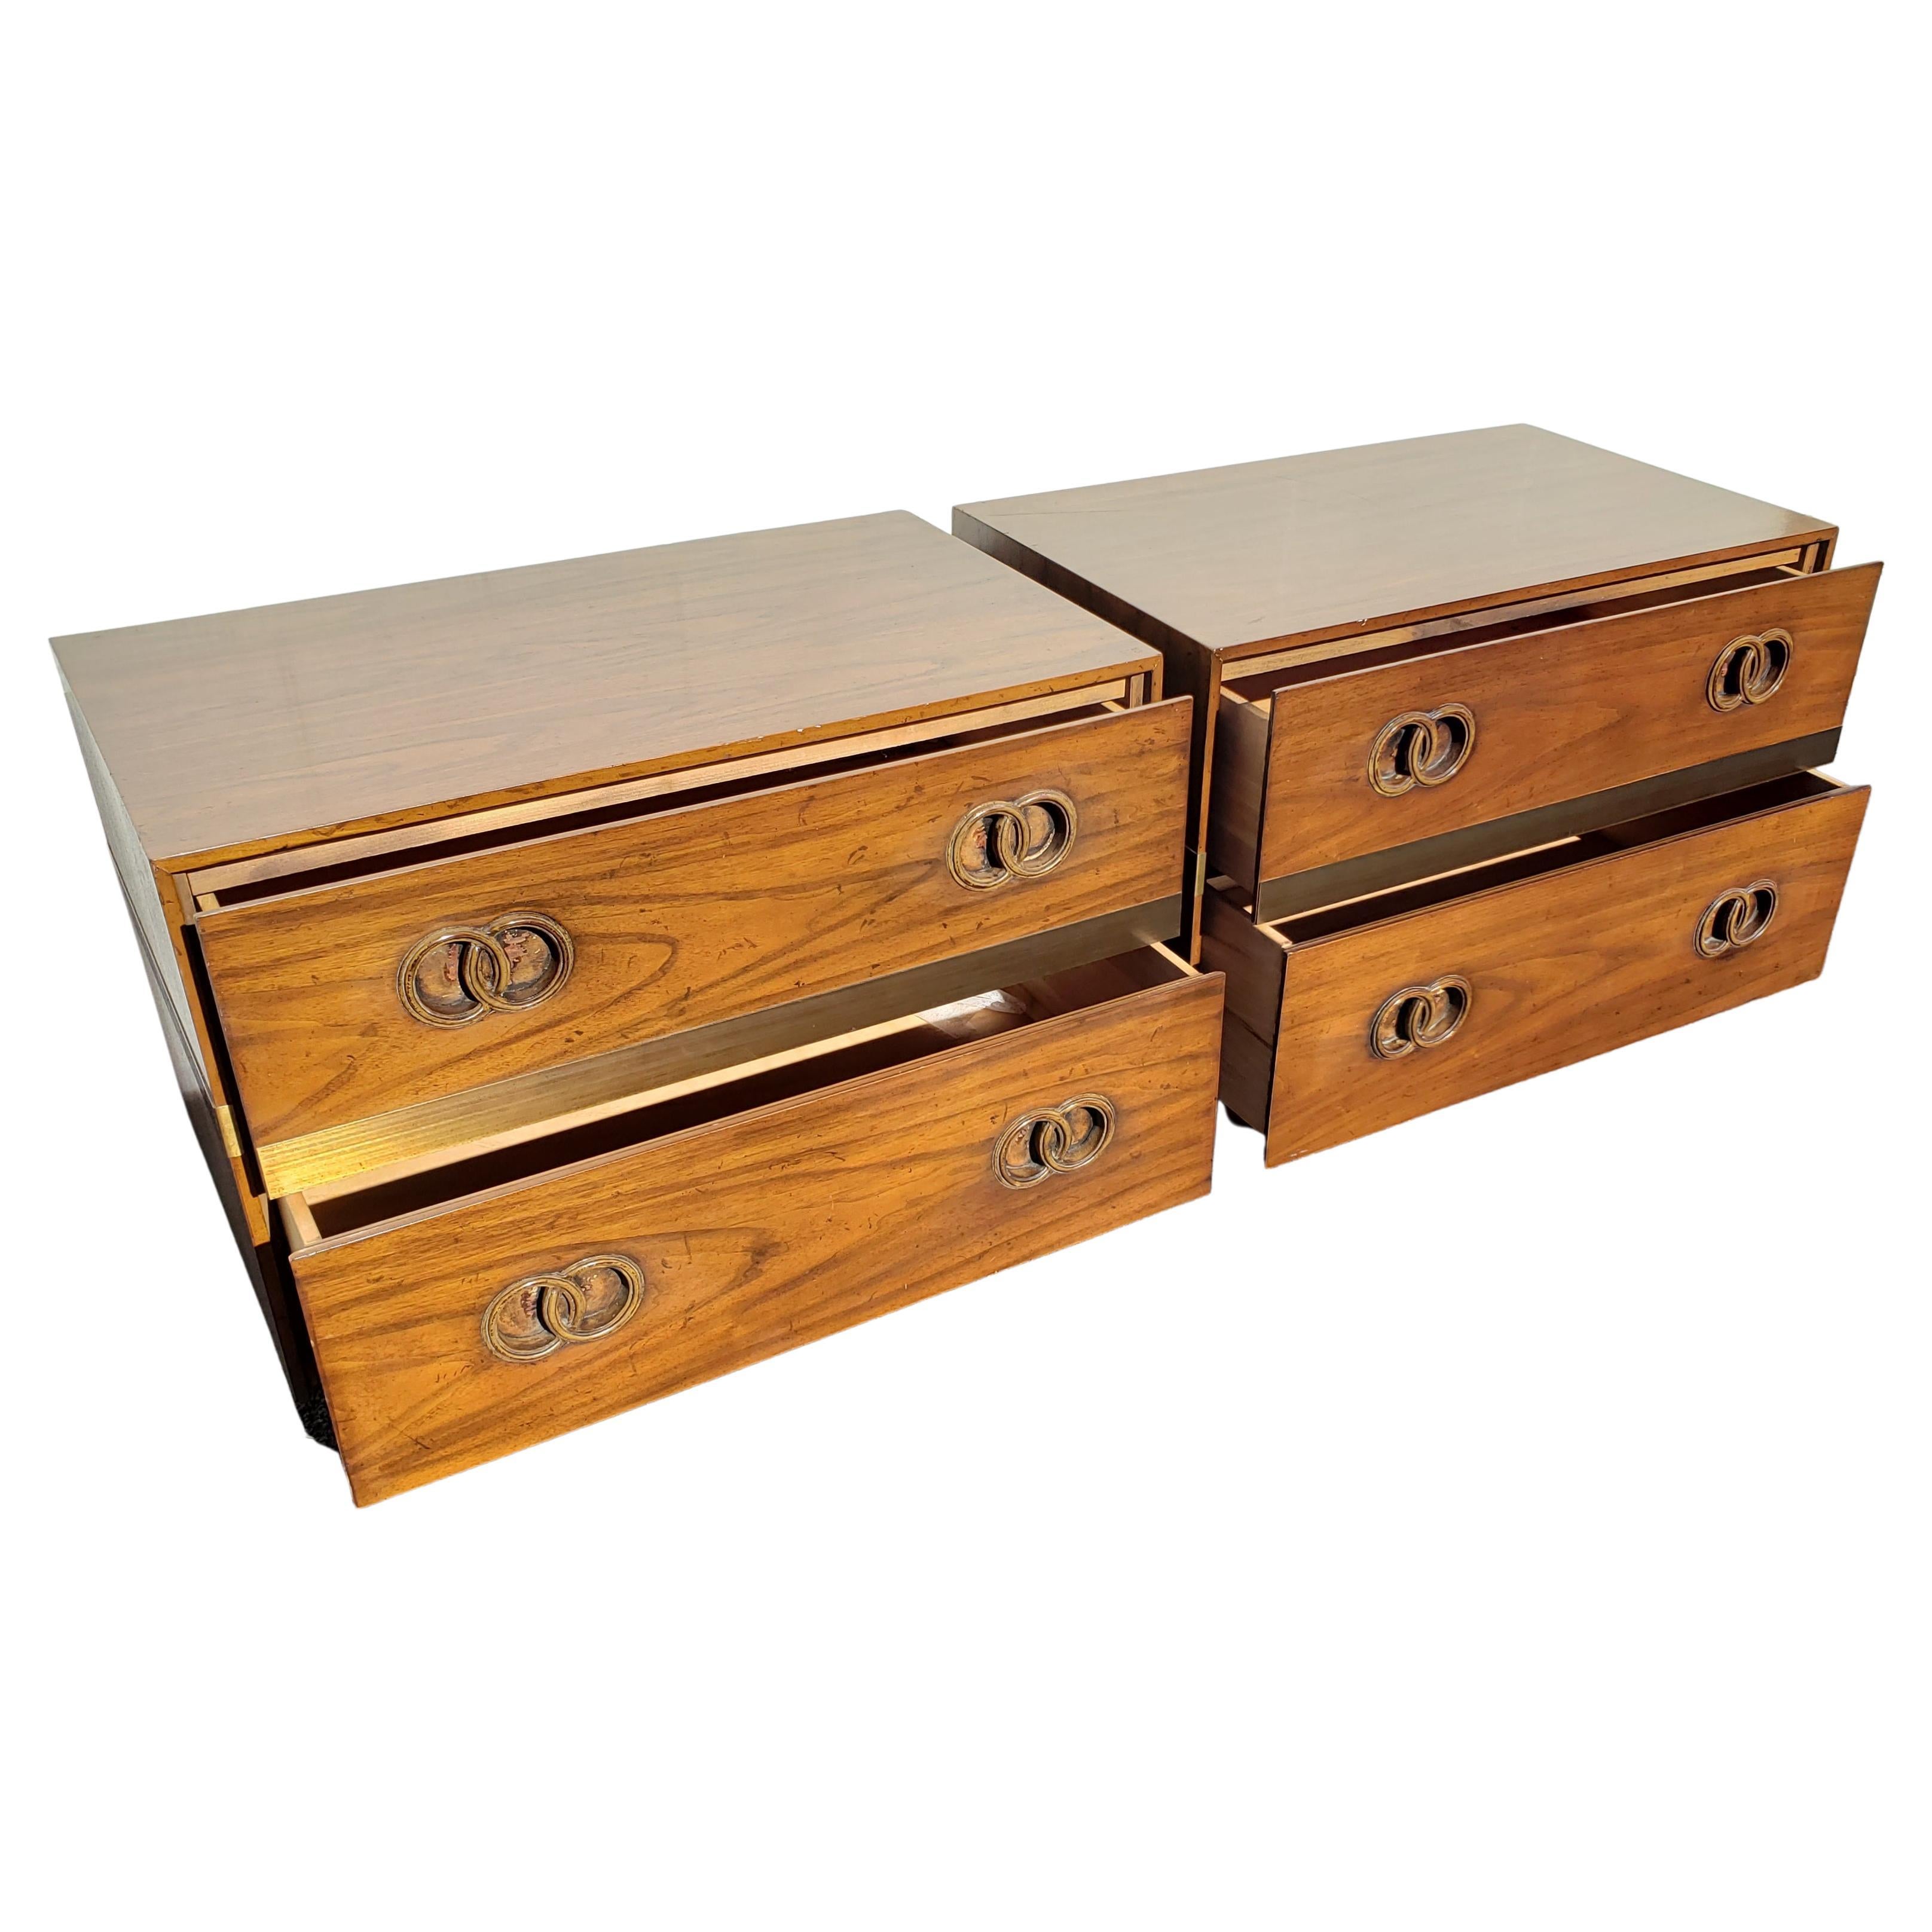 Woodwork Heritage Regency Walnut Drawers Chests Night Tables, circa 1950s, a Pair For Sale